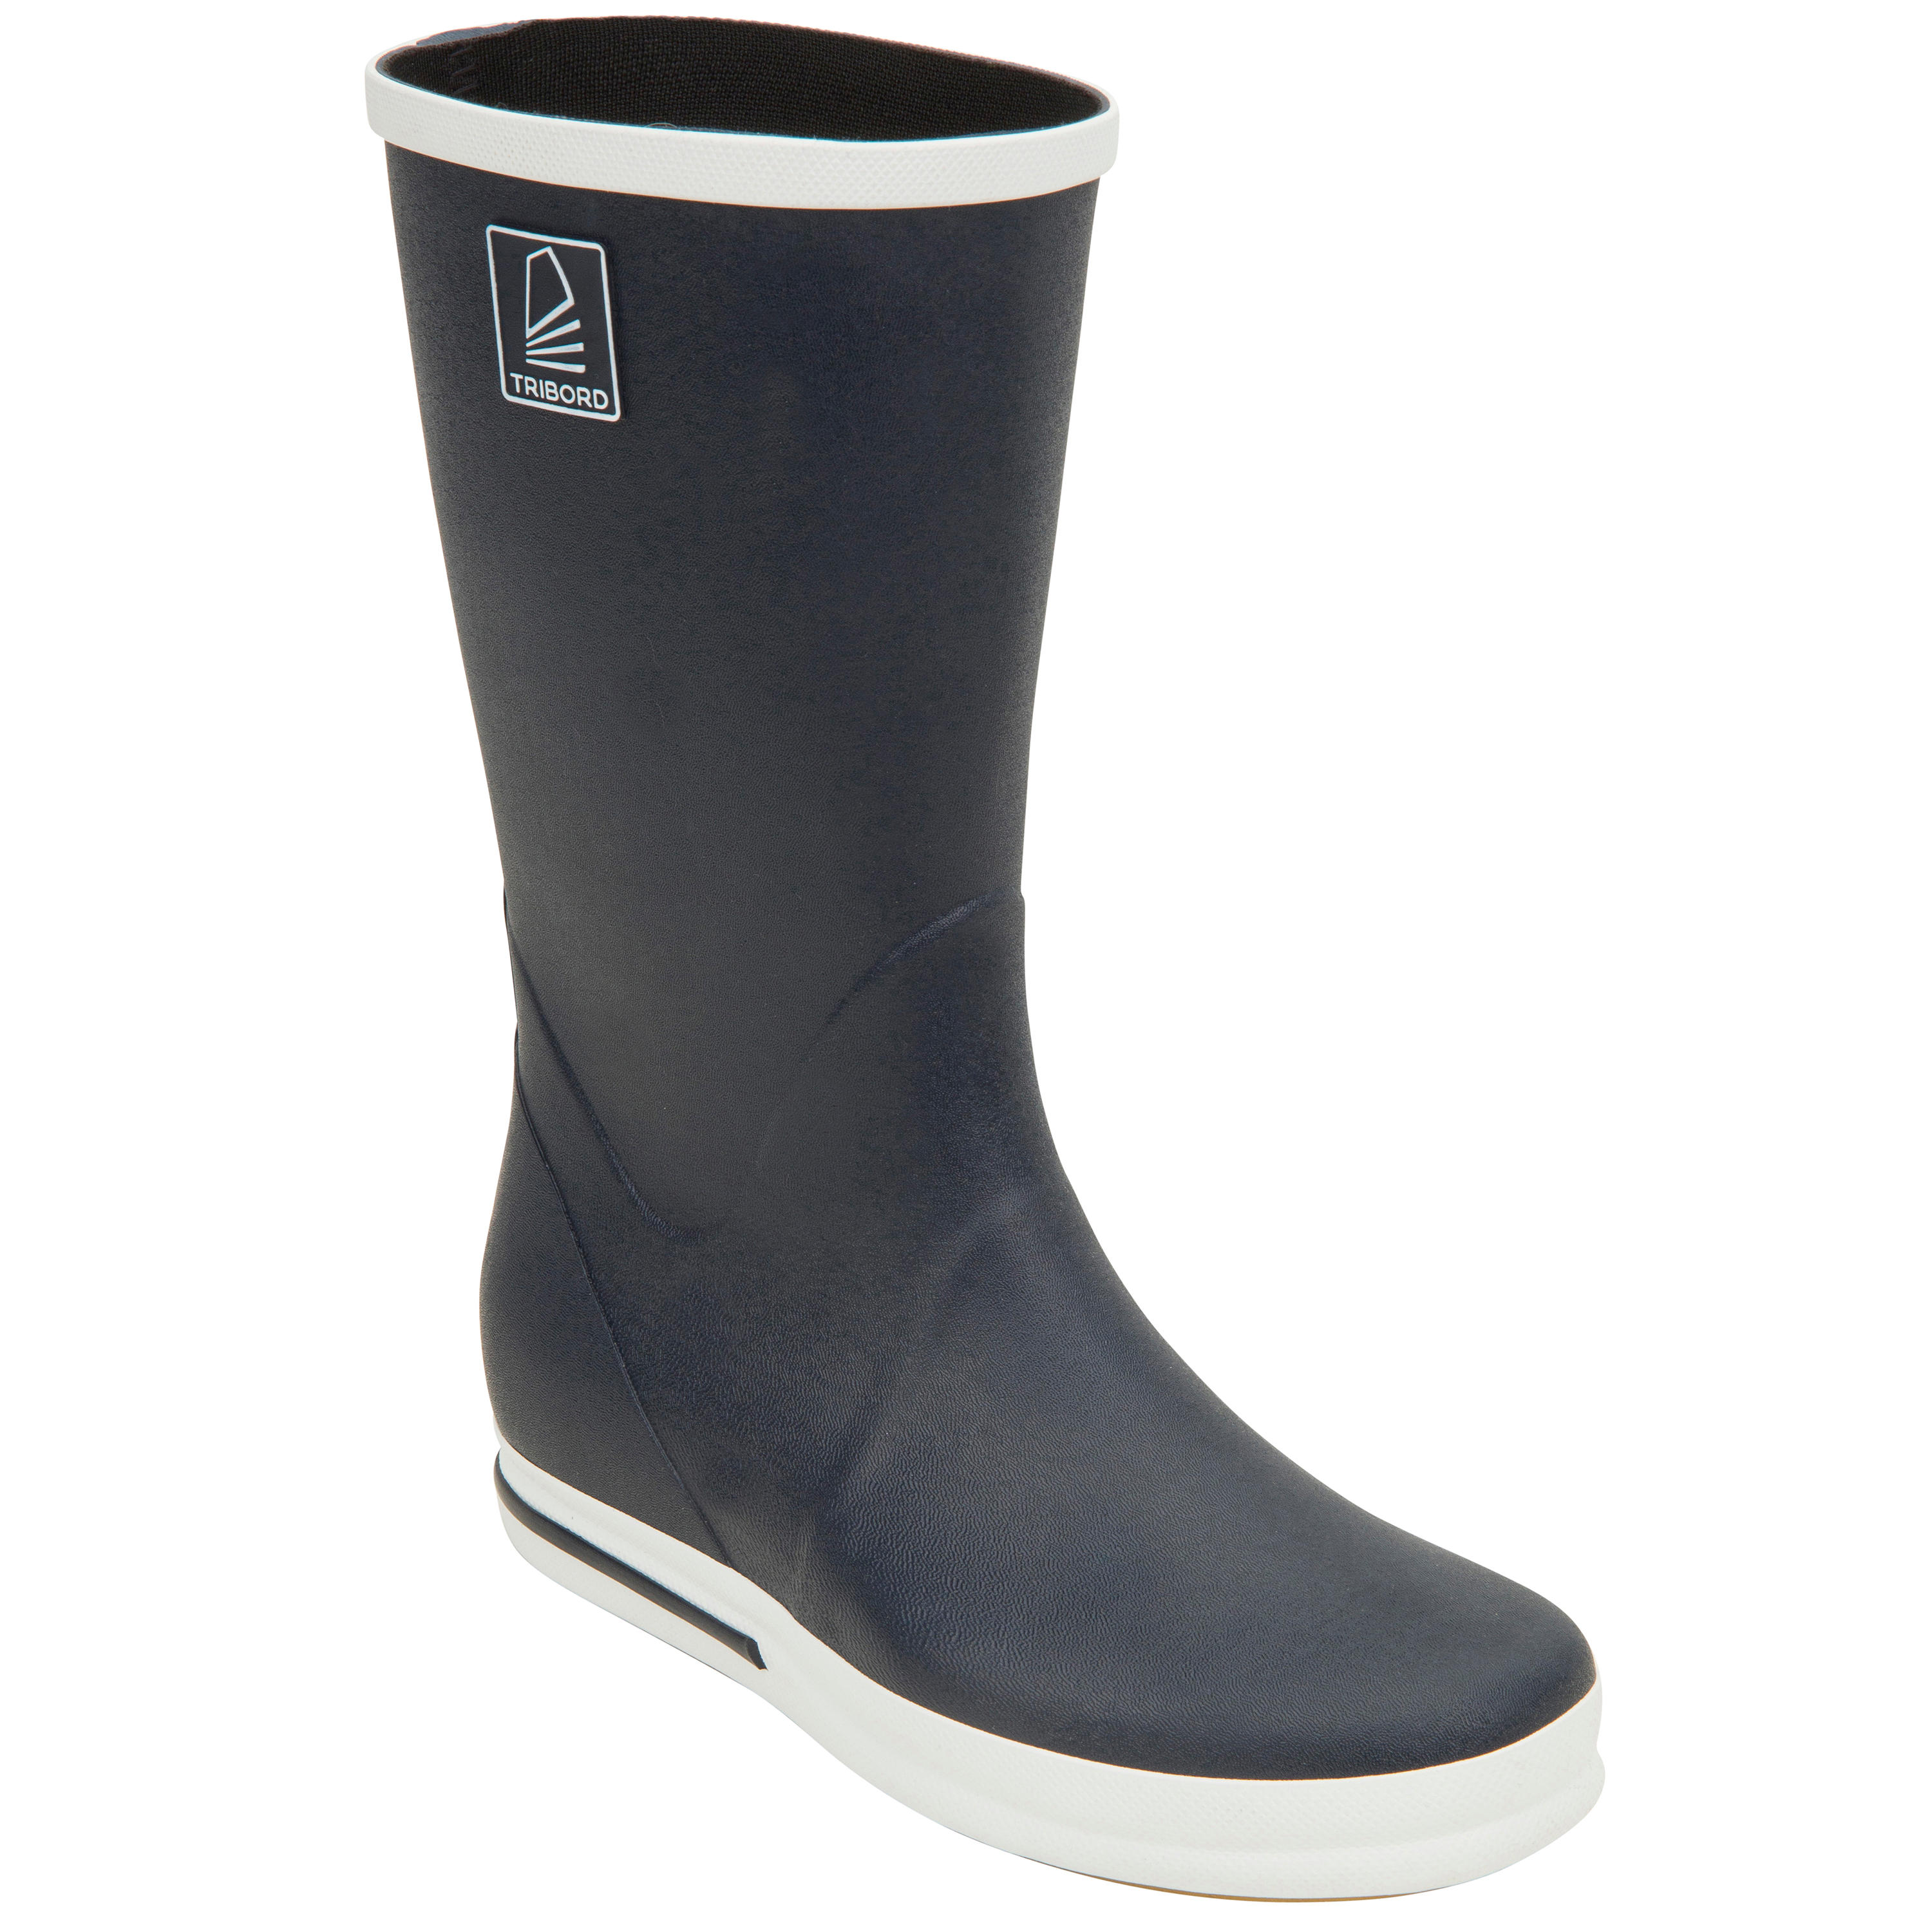 Sailing boots, rubber rain boots - 500 Adults' Navy 5/11